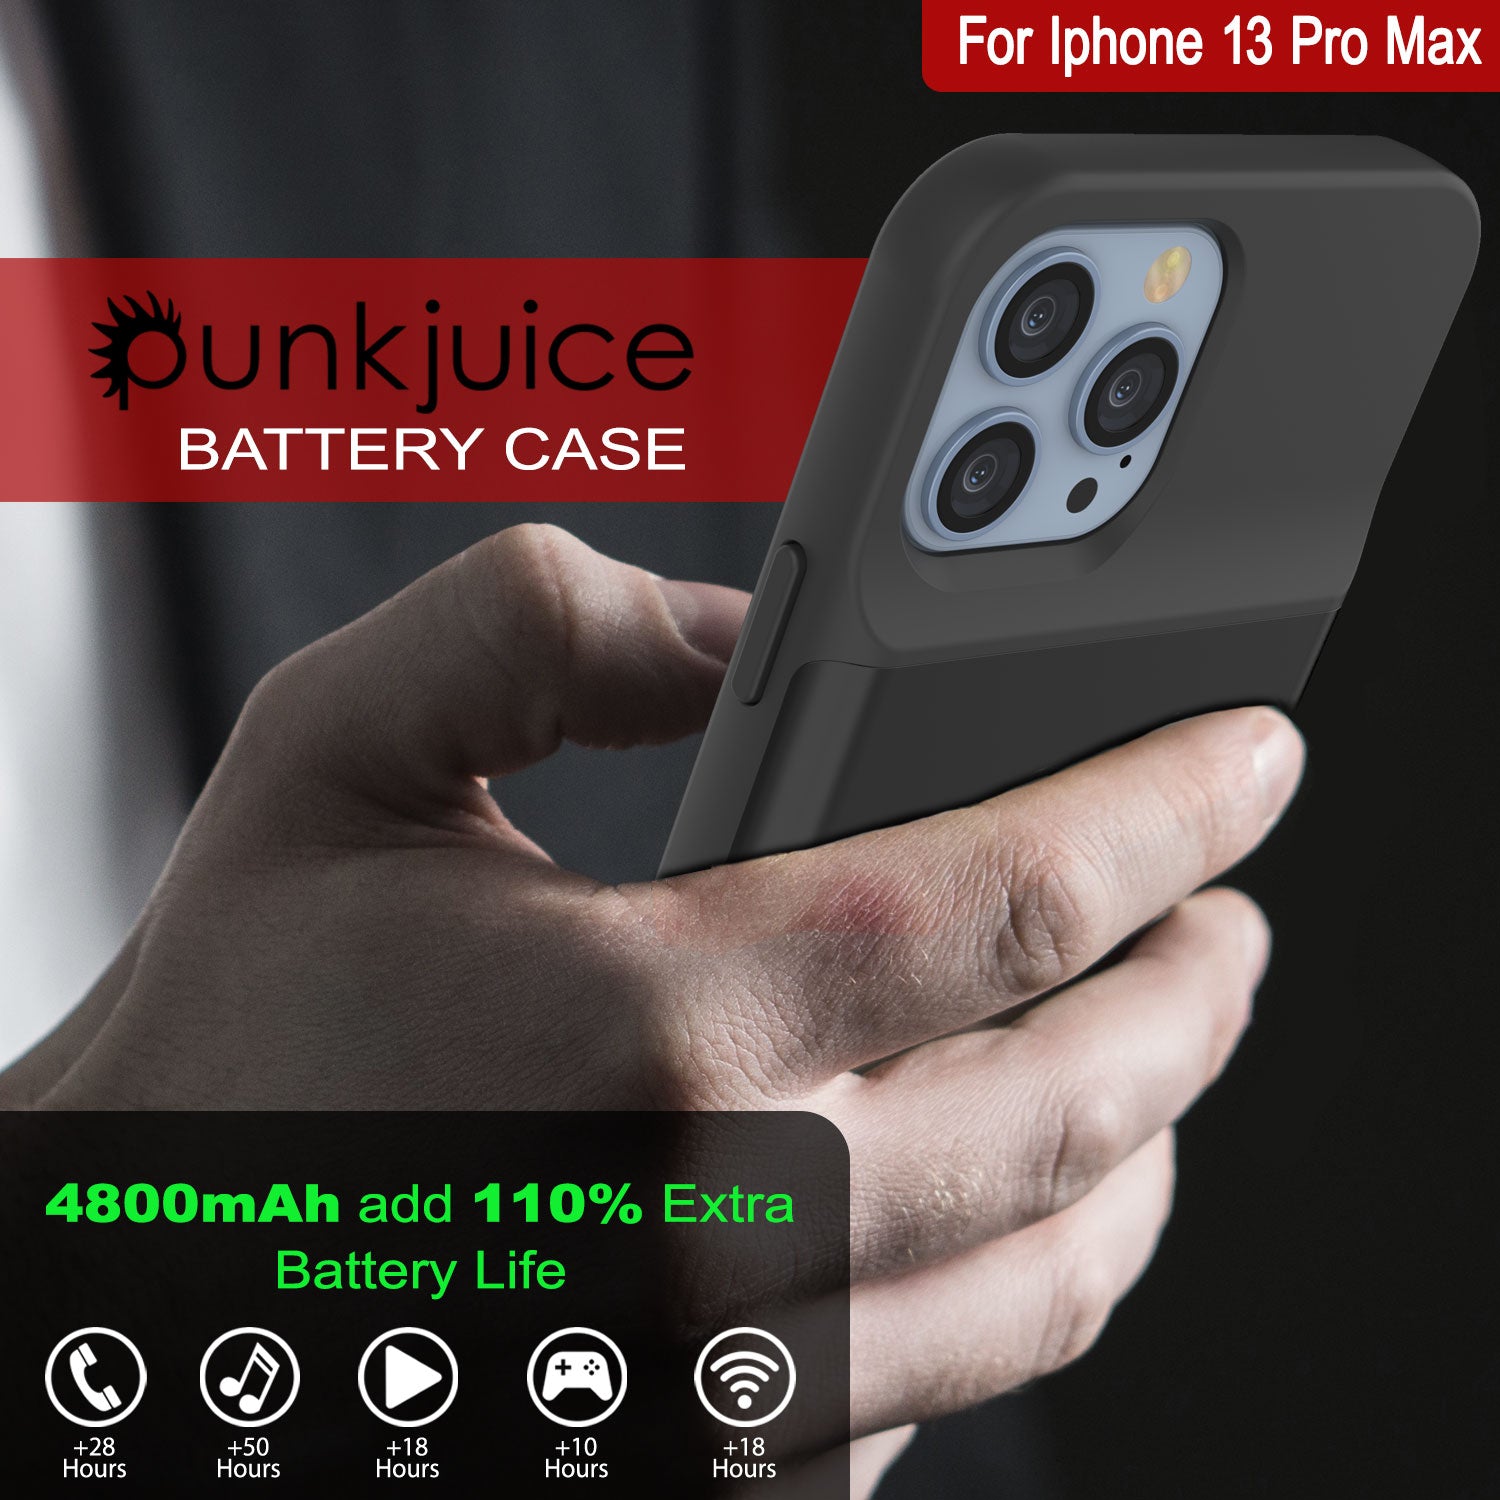 iPhone 13 Pro Max Battery Case, PunkJuice 4800mAH Fast Charging Power Bank  W/ Screen Protector | [Black]